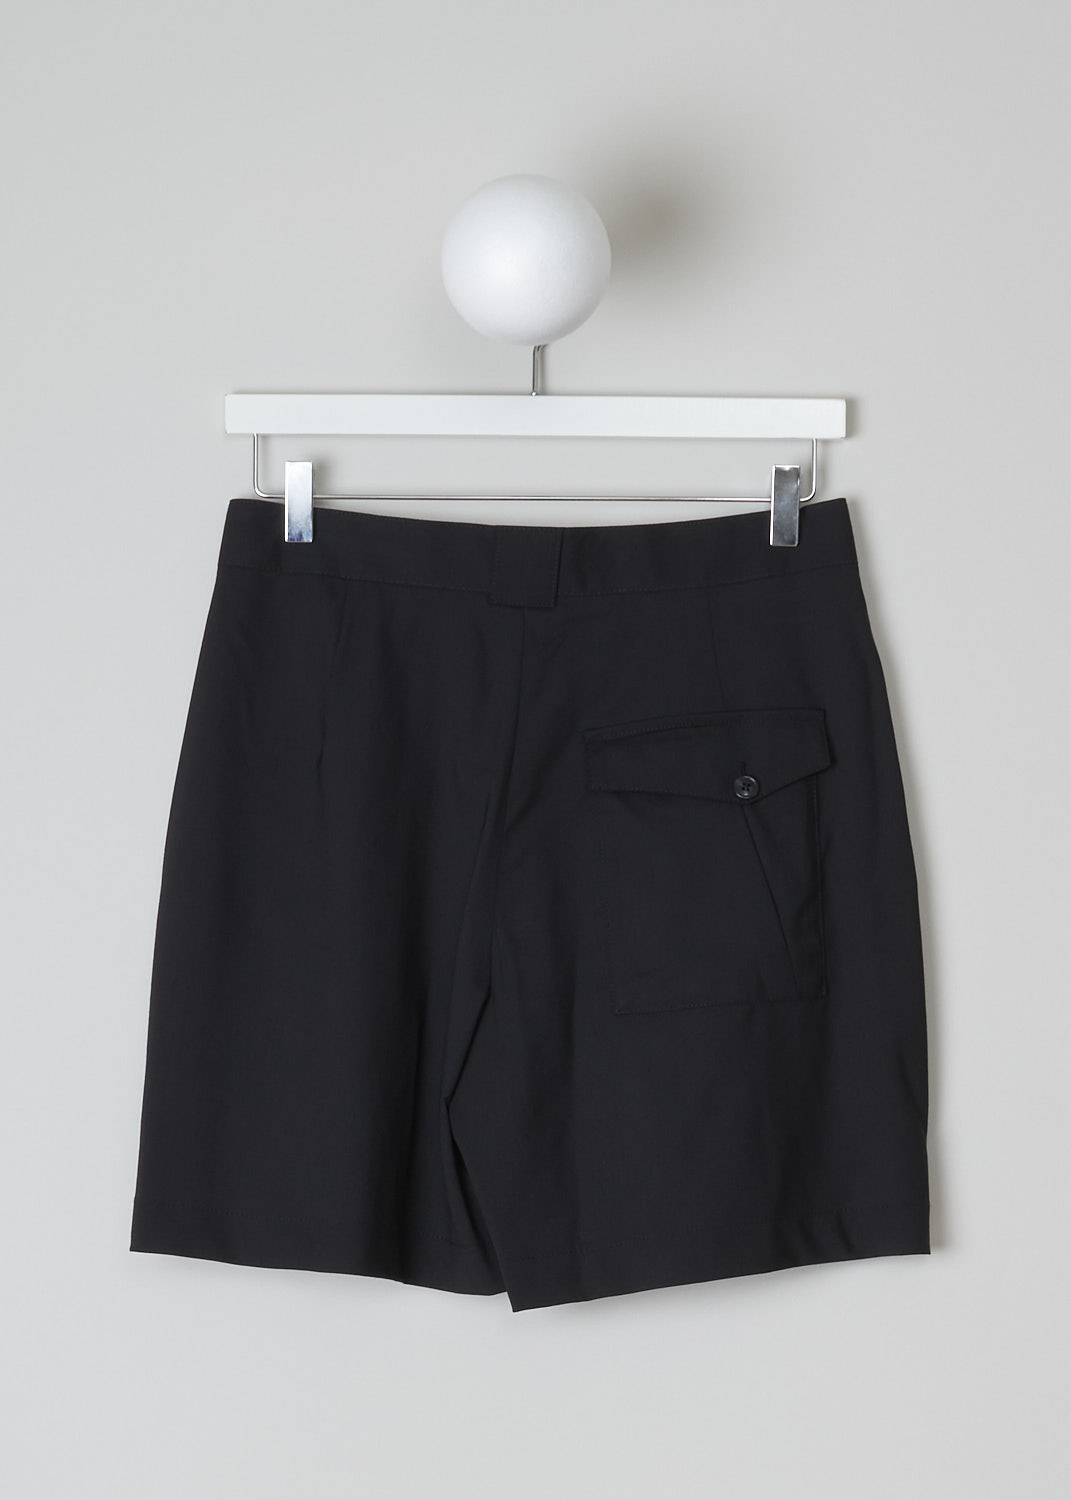 CLOSED, BLACK WOOL SHORTS, JOON_C92051_35H_22_100, Black, Back, These high-waisted black wool shorts have a waistband with belt loops and a button and zipper closure. Subtle knife pleats decorate the front. These shorts have slanted pockets in the front and a single buttoned patch pocket in the back.   
